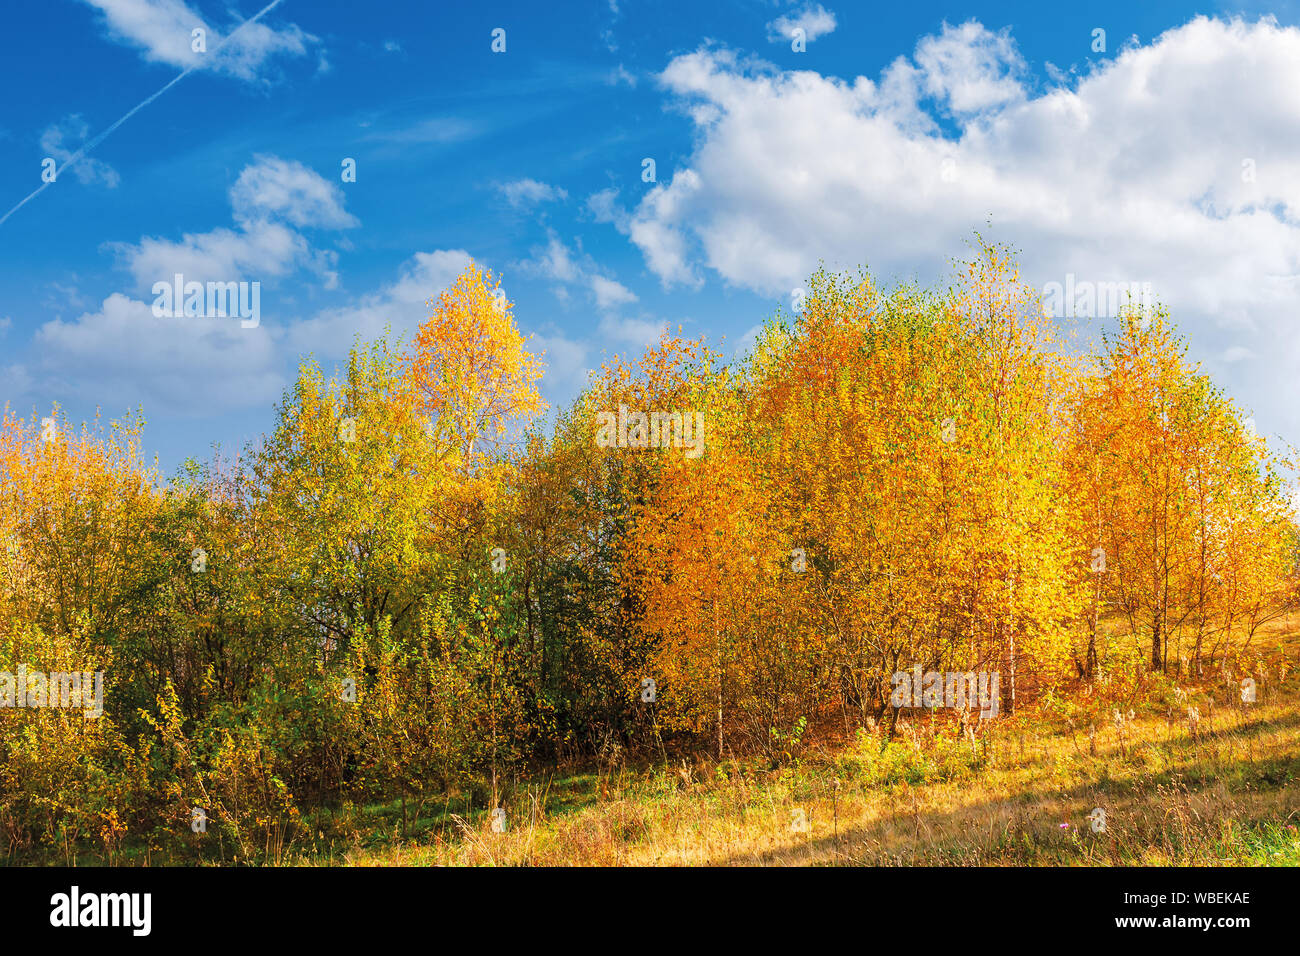 birch trees in golden foliage on the hill. beautiful fall scenery on a bright day beneath a blue sky with fluffy clouds Stock Photo